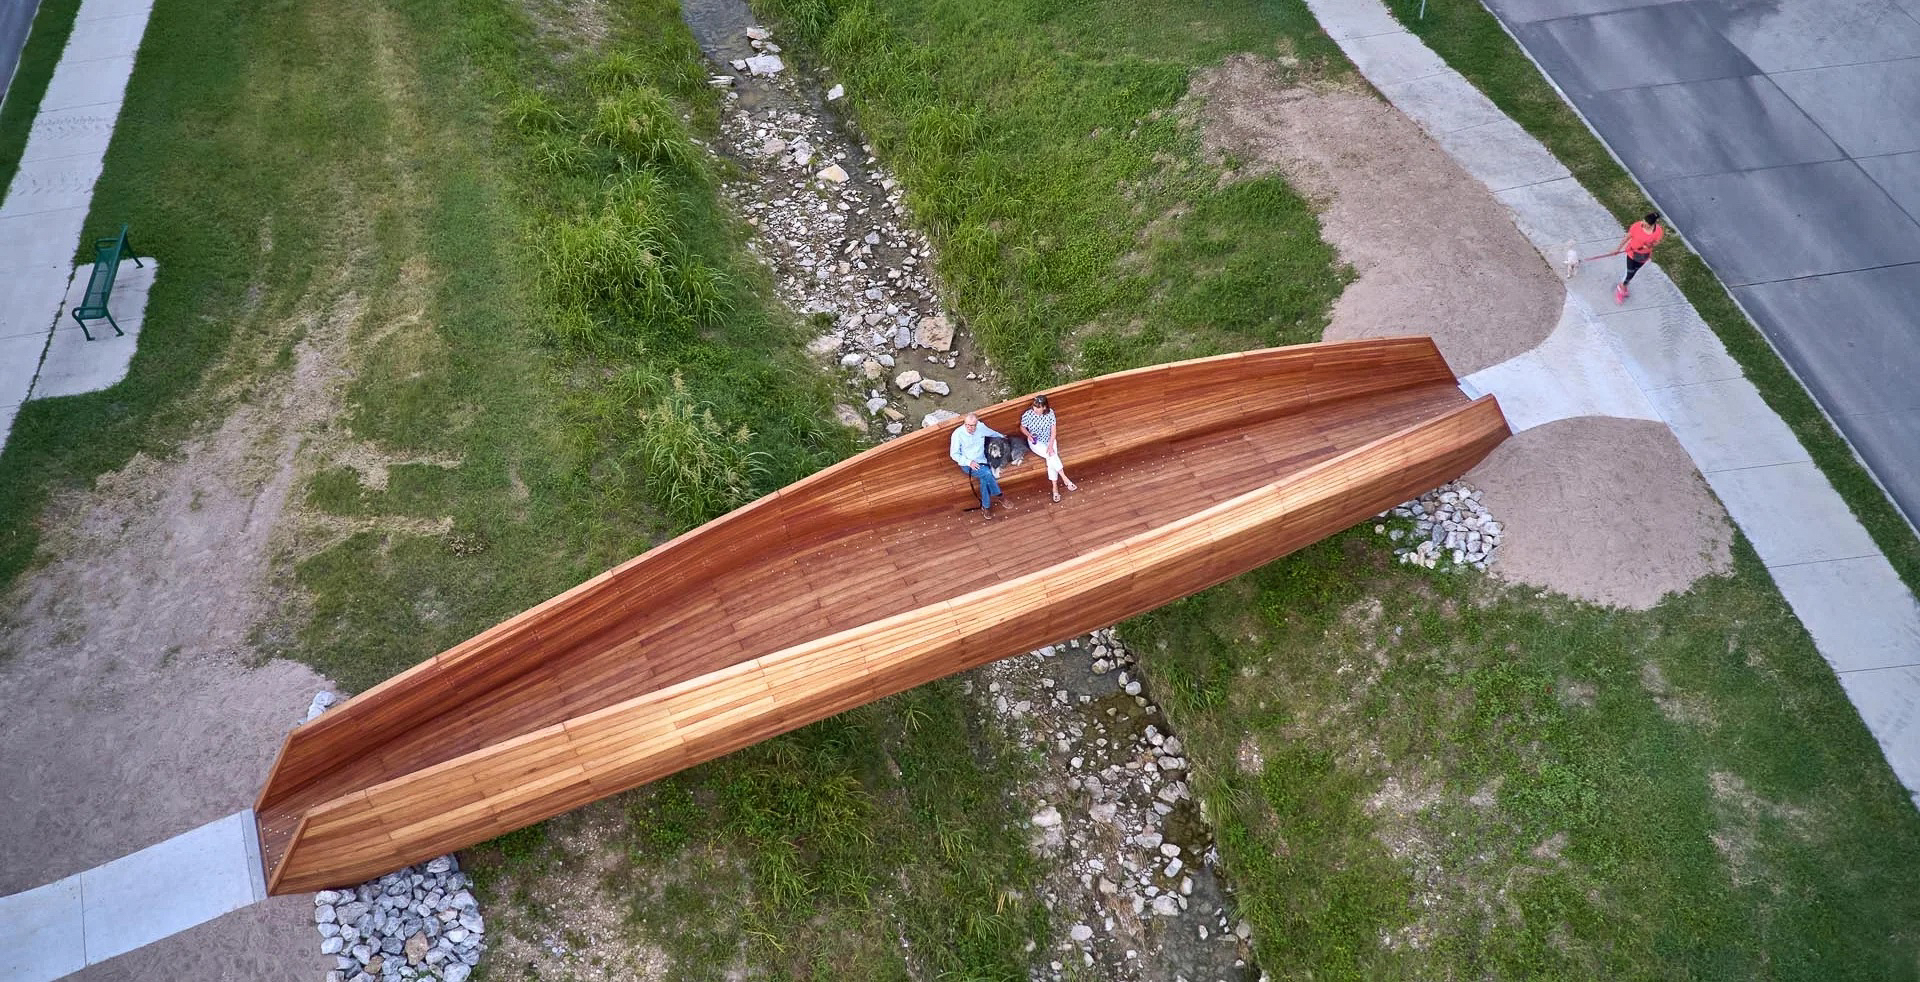 An aerial view of a public artwork made of cedar wood. It is a short bridge structure that extends over a small rocky creek. The piece almost looks like an oversized canoe. There are two people with a dog sitting on a seating that extends from the inside of the artwork.